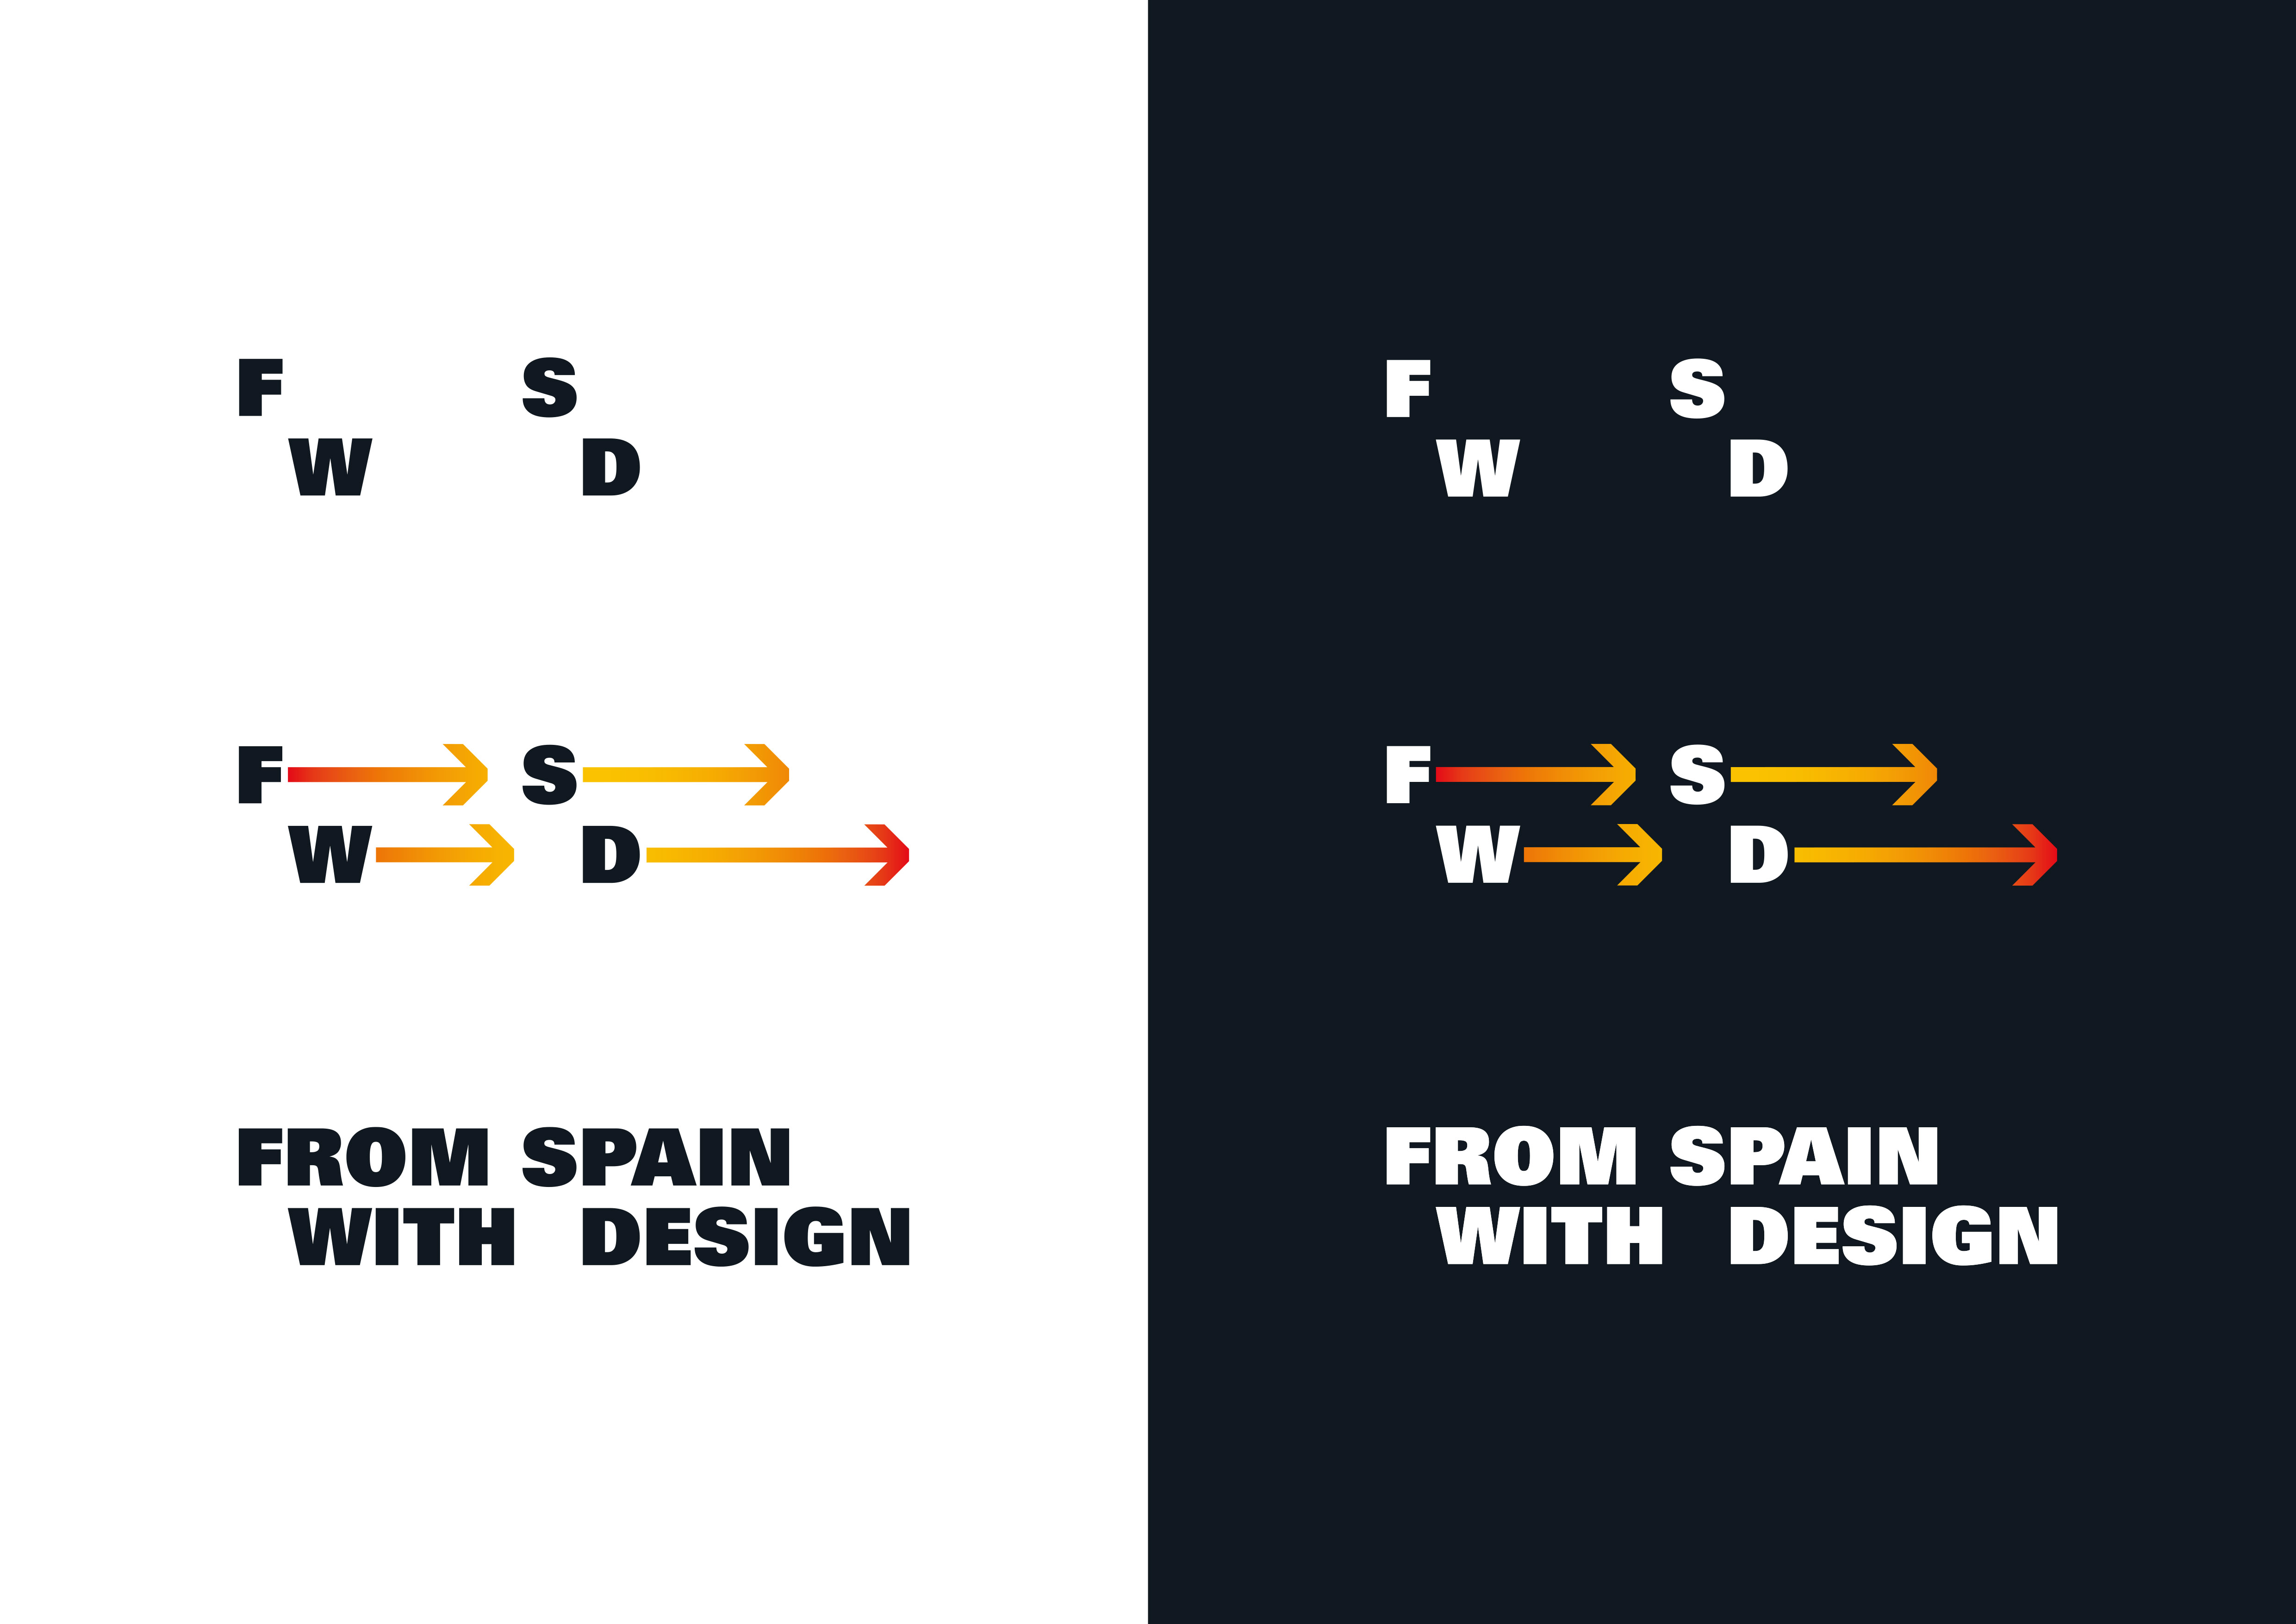 FROM SPAIN WITH DESIGN by Nueve - Creative Work - $i